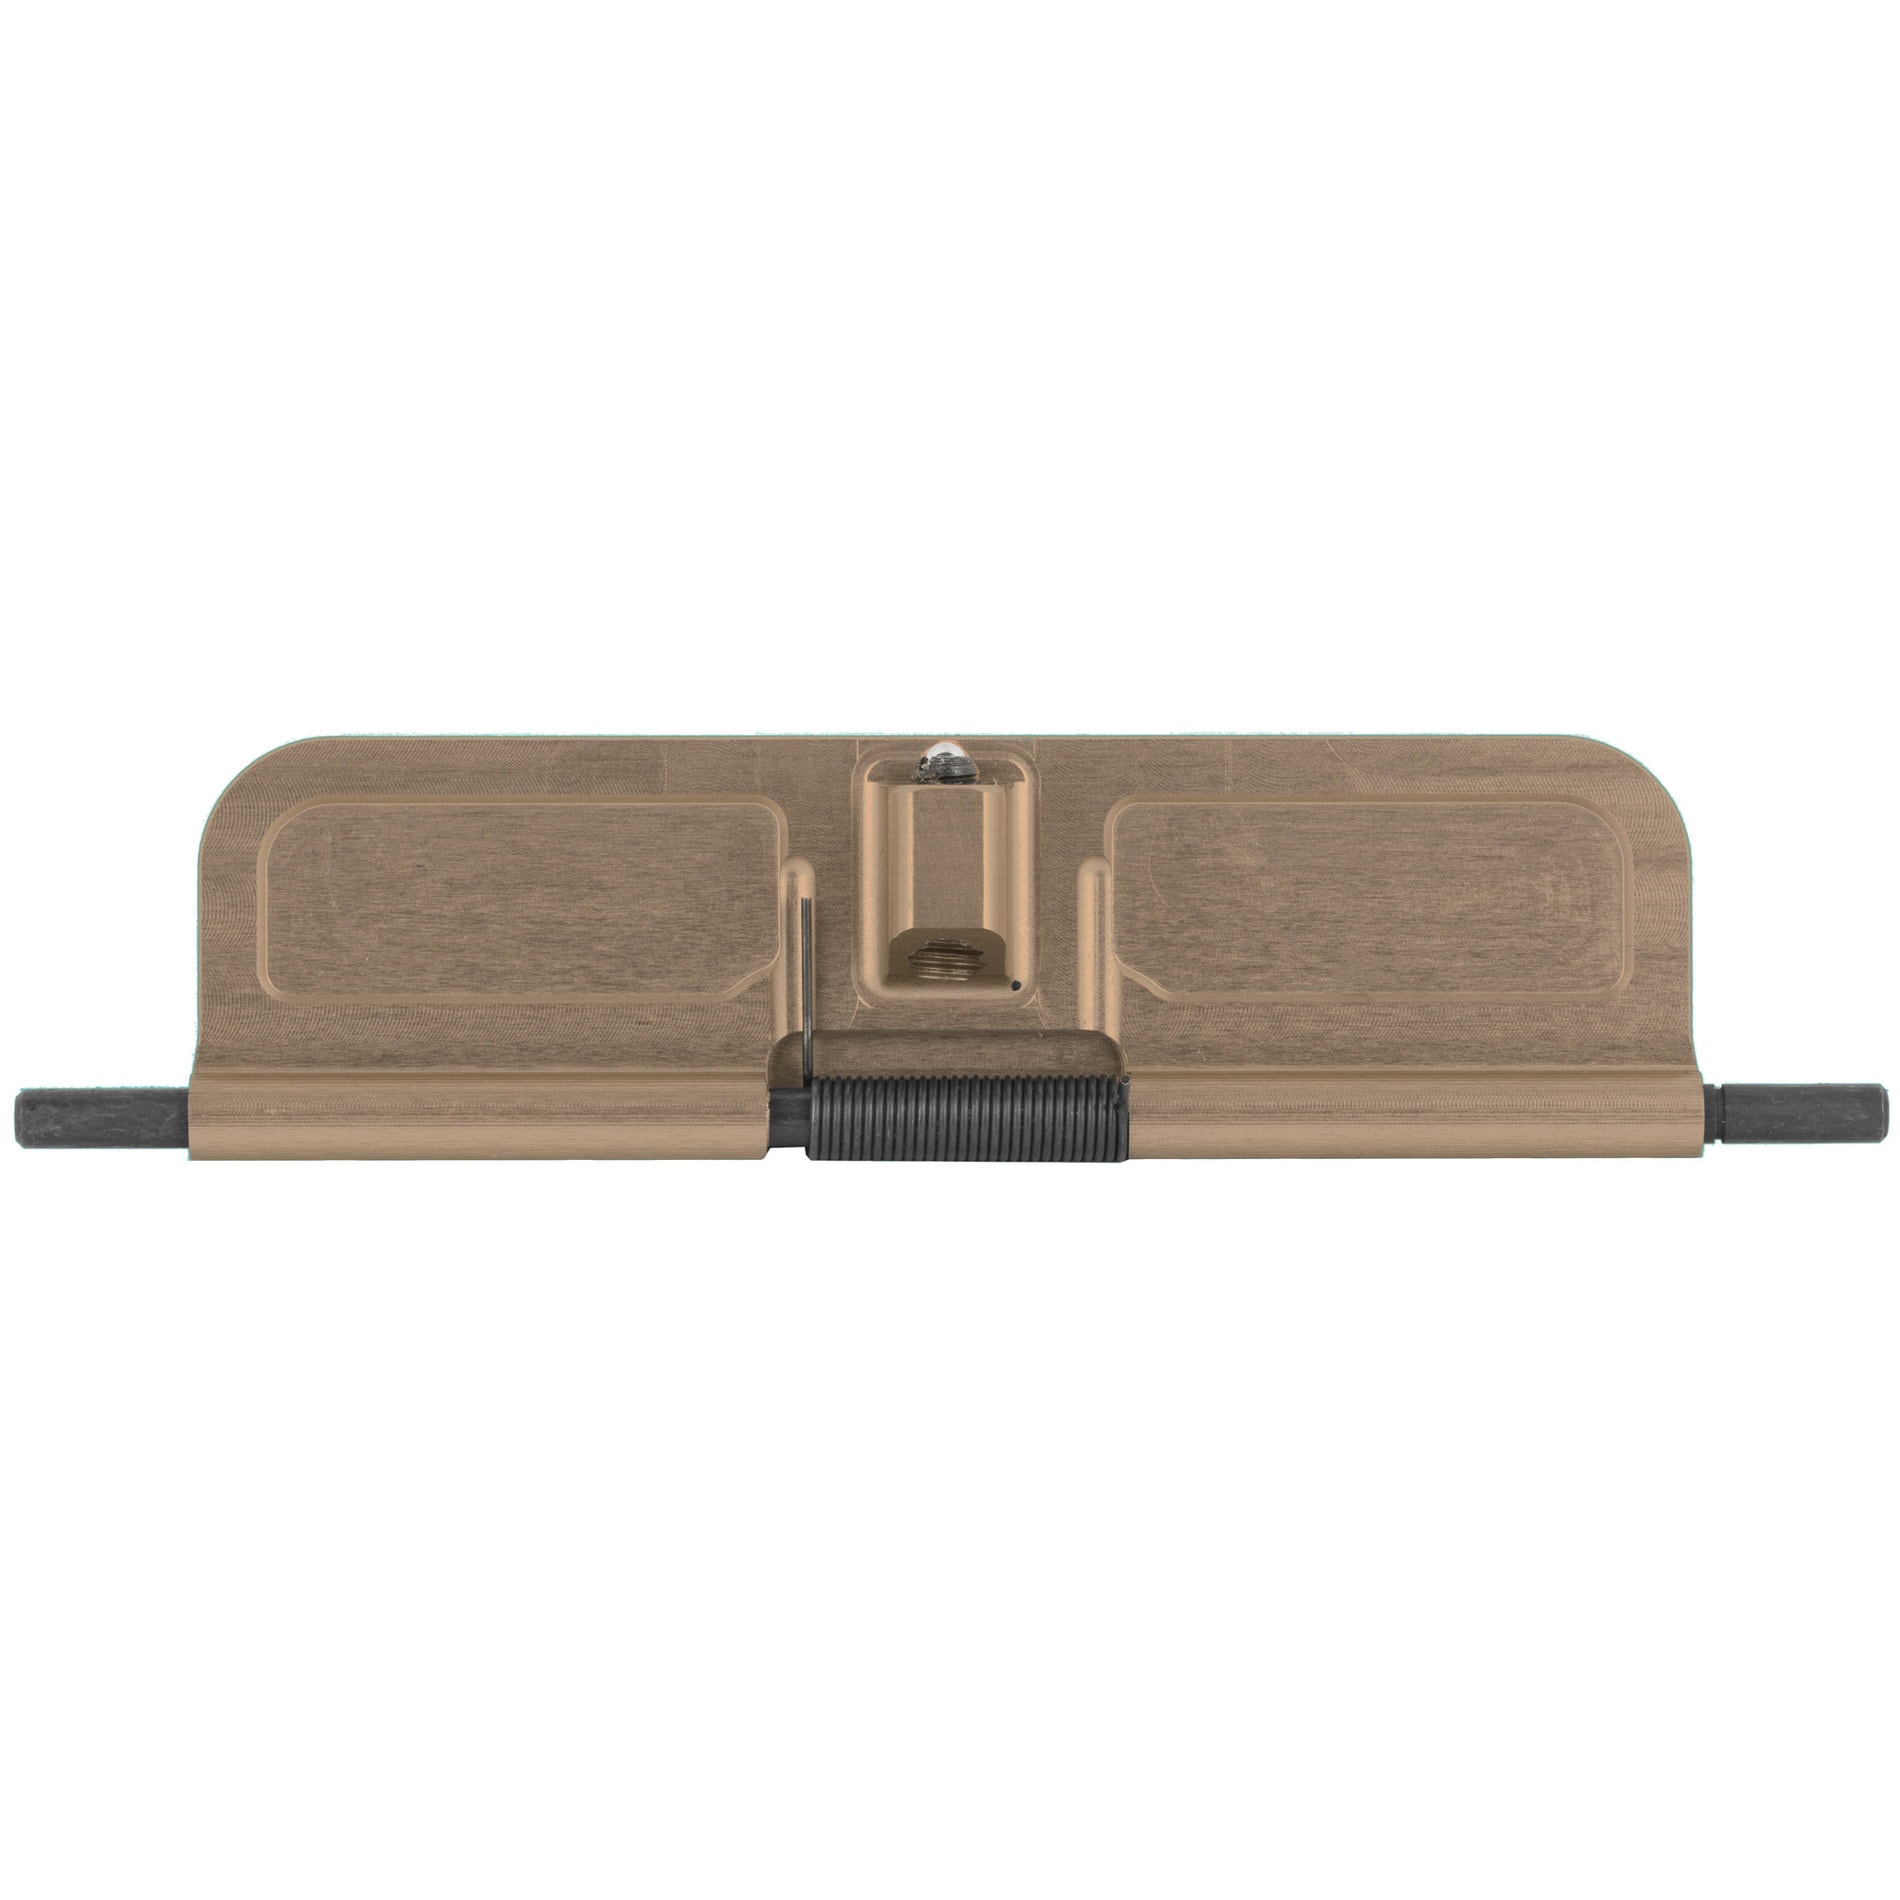 EJECTION PORT DUST COVER, 6MM CREED